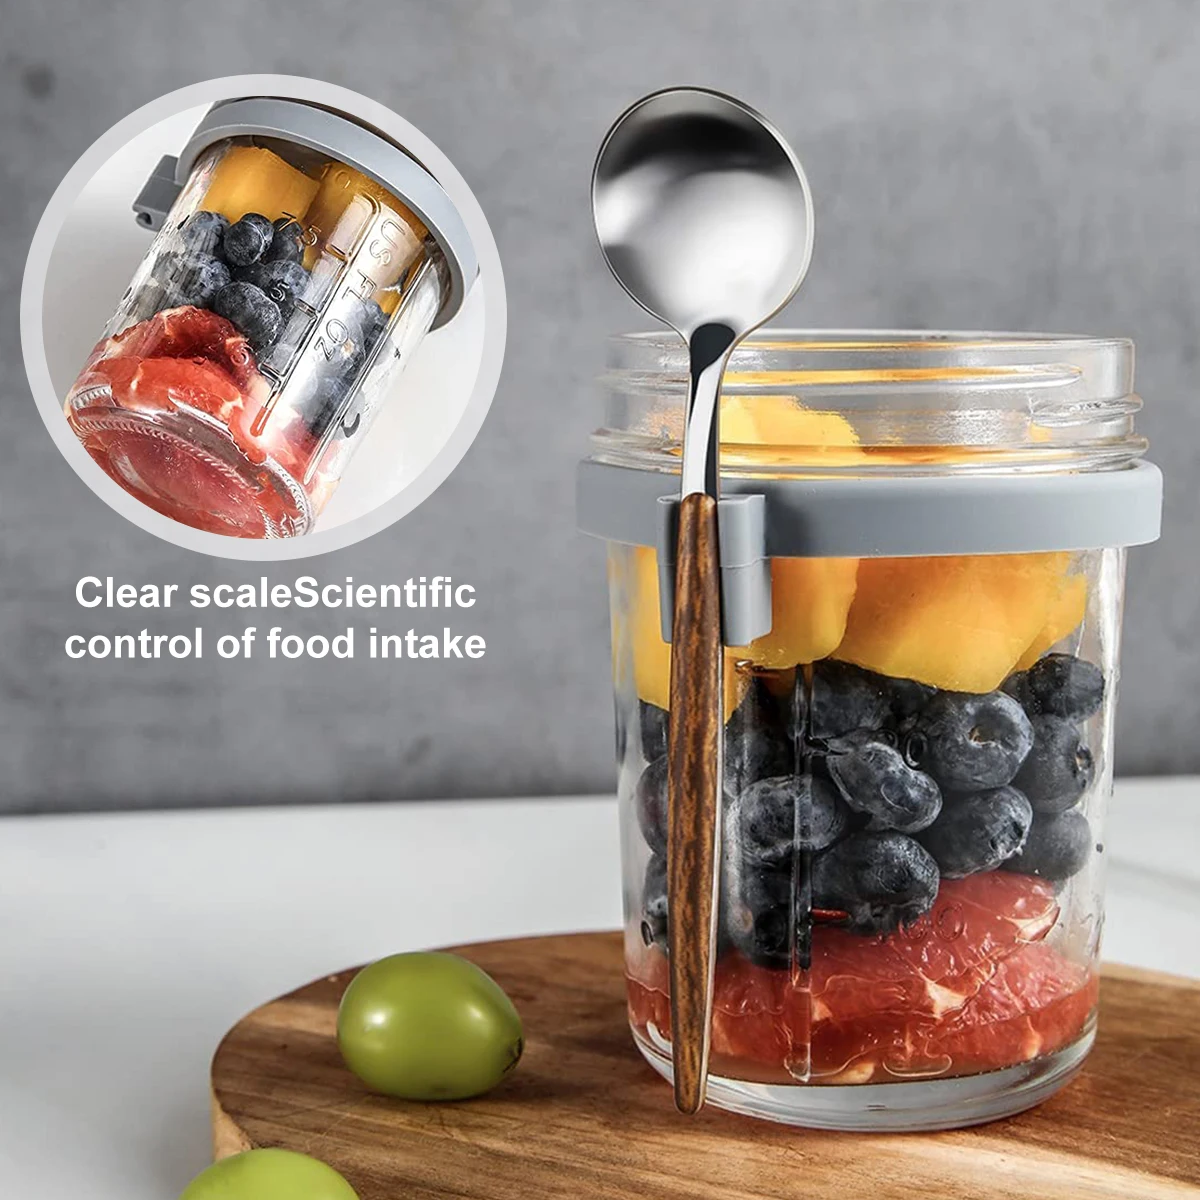 https://ae01.alicdn.com/kf/Sf2e47c9506344b53a0ad3d51d015ae0cS/Oatmeal-Cup-Overnight-Oats-Jars-Breakfast-Cup-with-Lid-and-Spoon-Wide-Mouth-Mason-Jars-Oatmeal.jpg